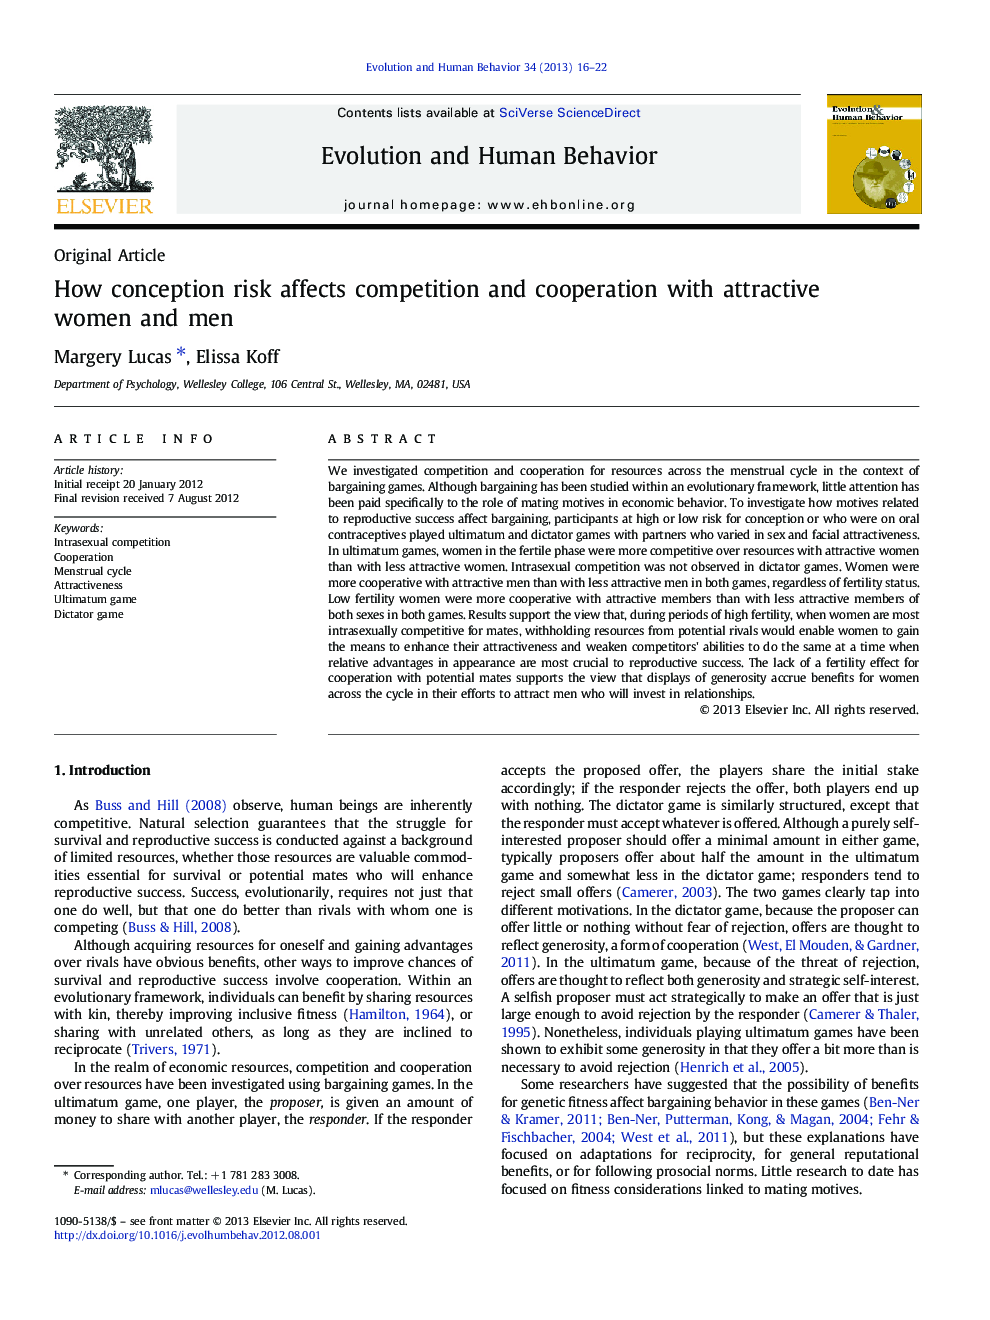 How conception risk affects competition and cooperation with attractive women and men